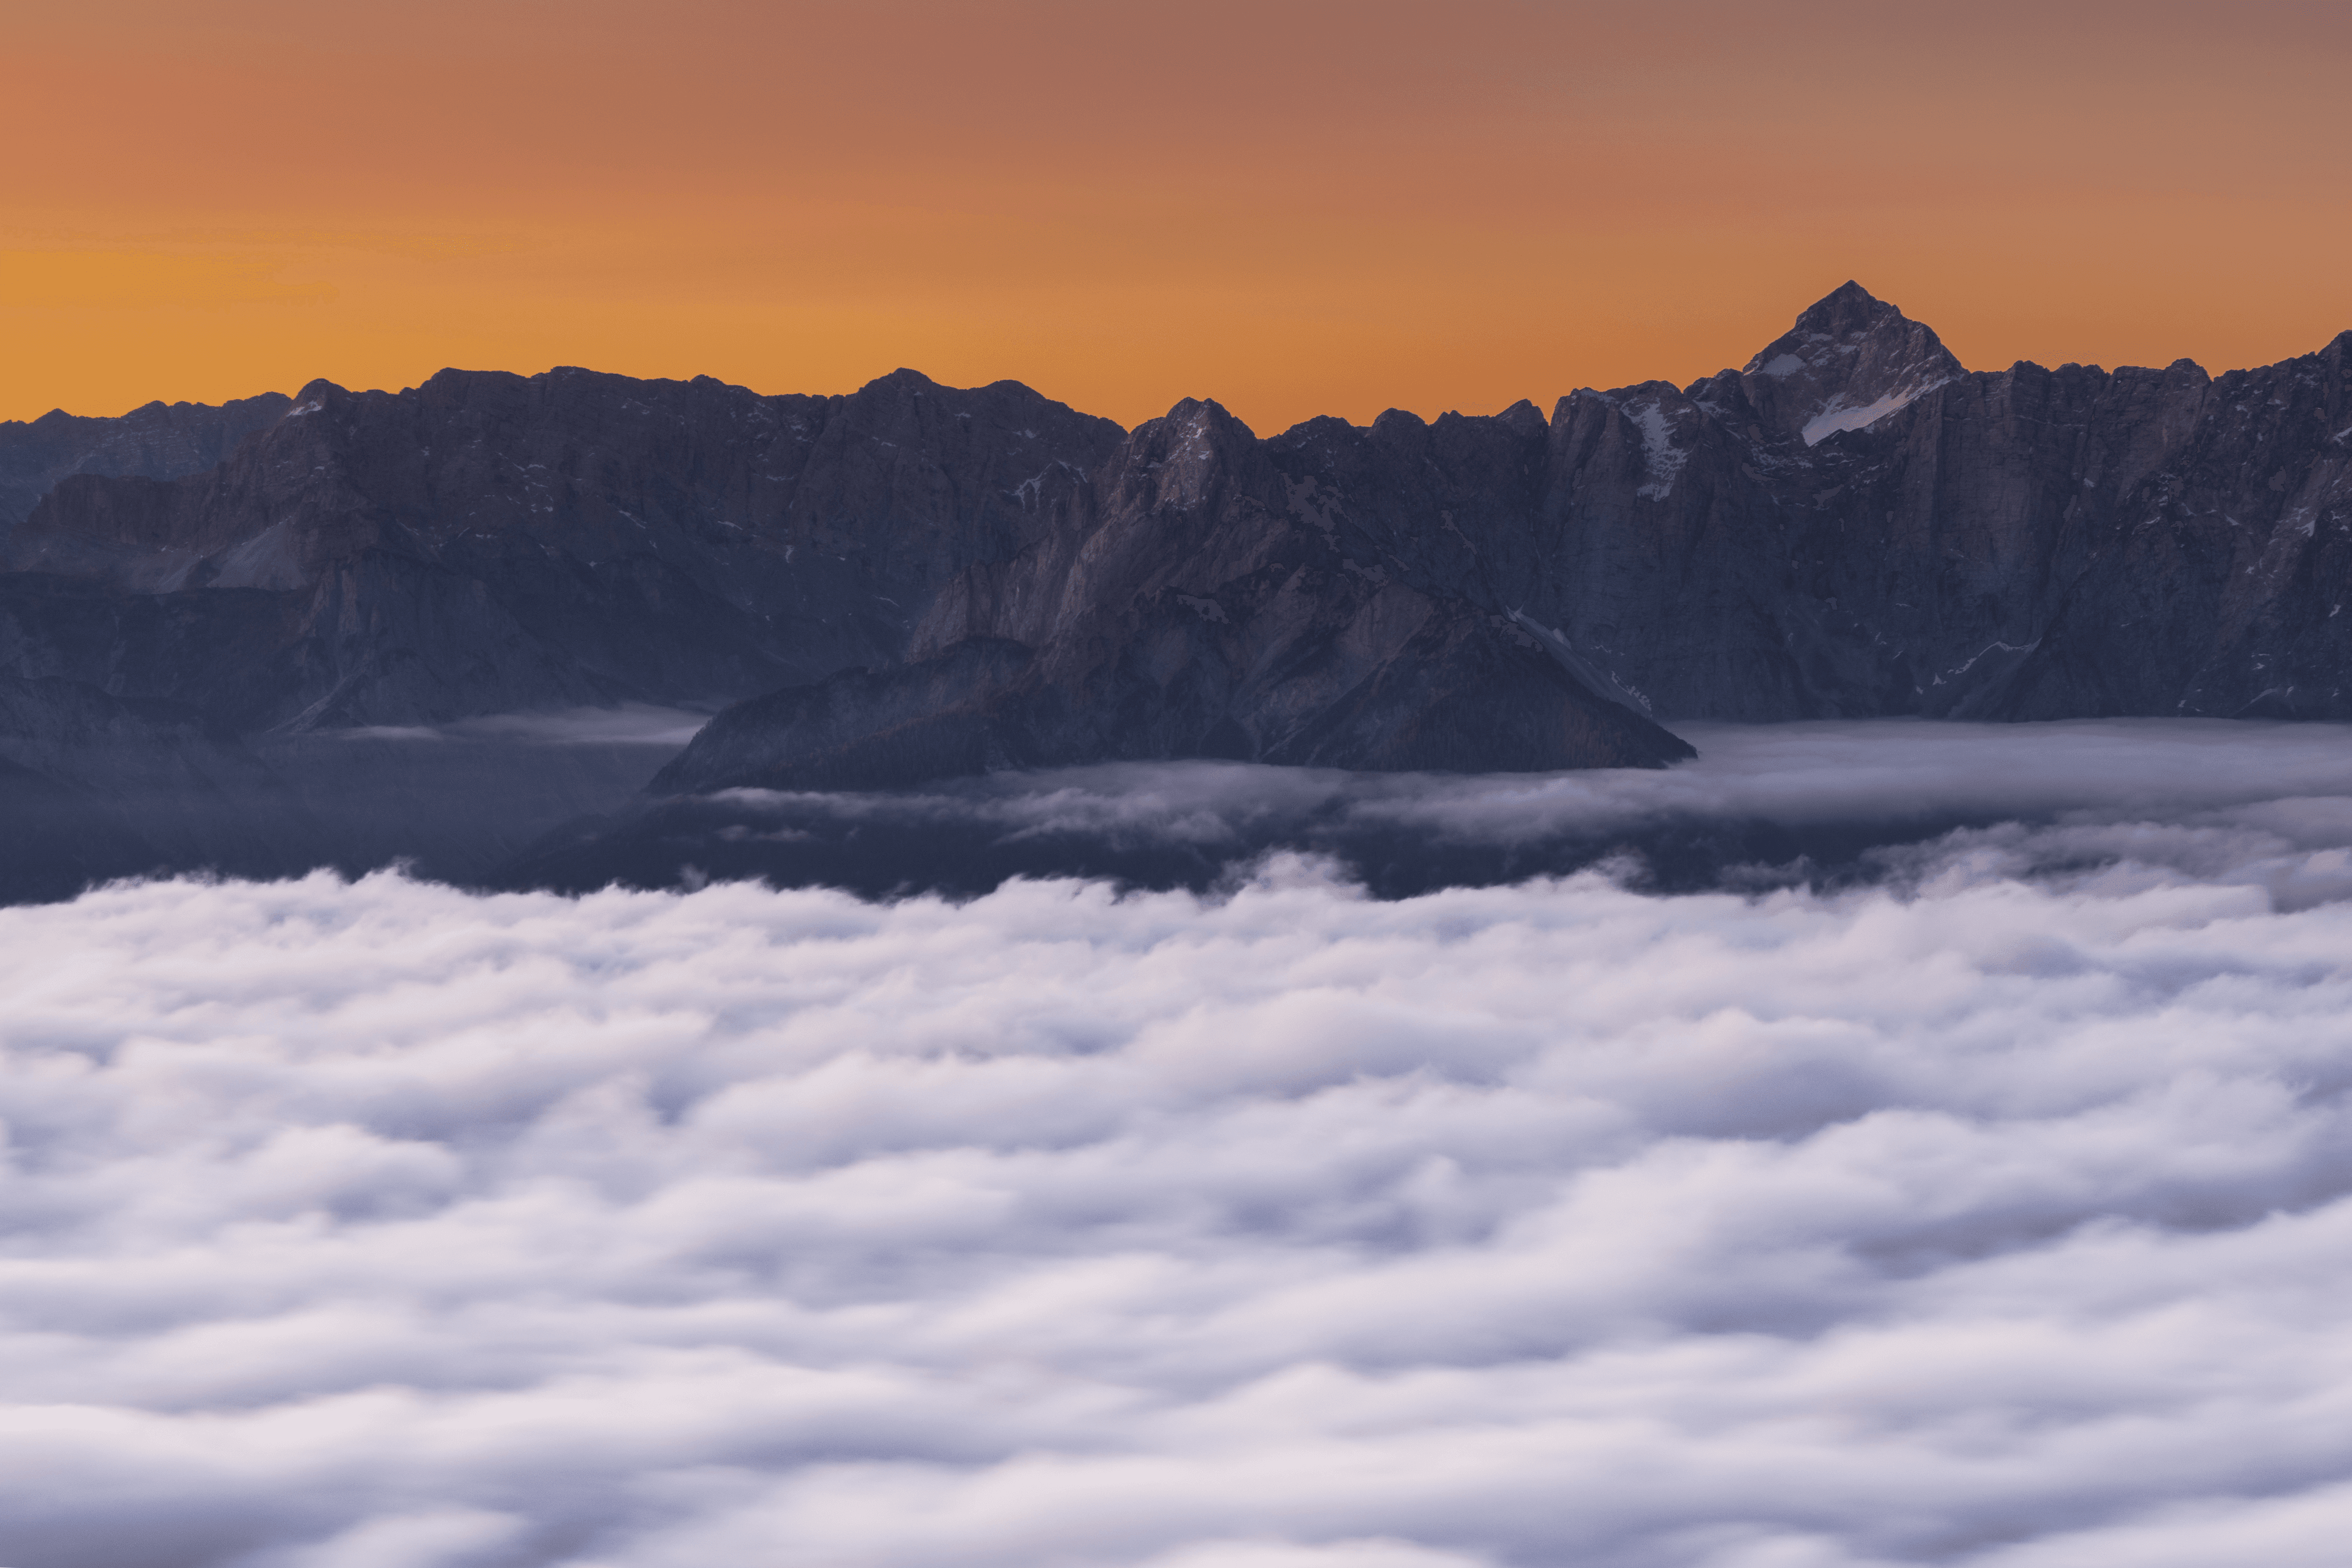 Morning over the Clouds - Dobratsch Sunrise 01